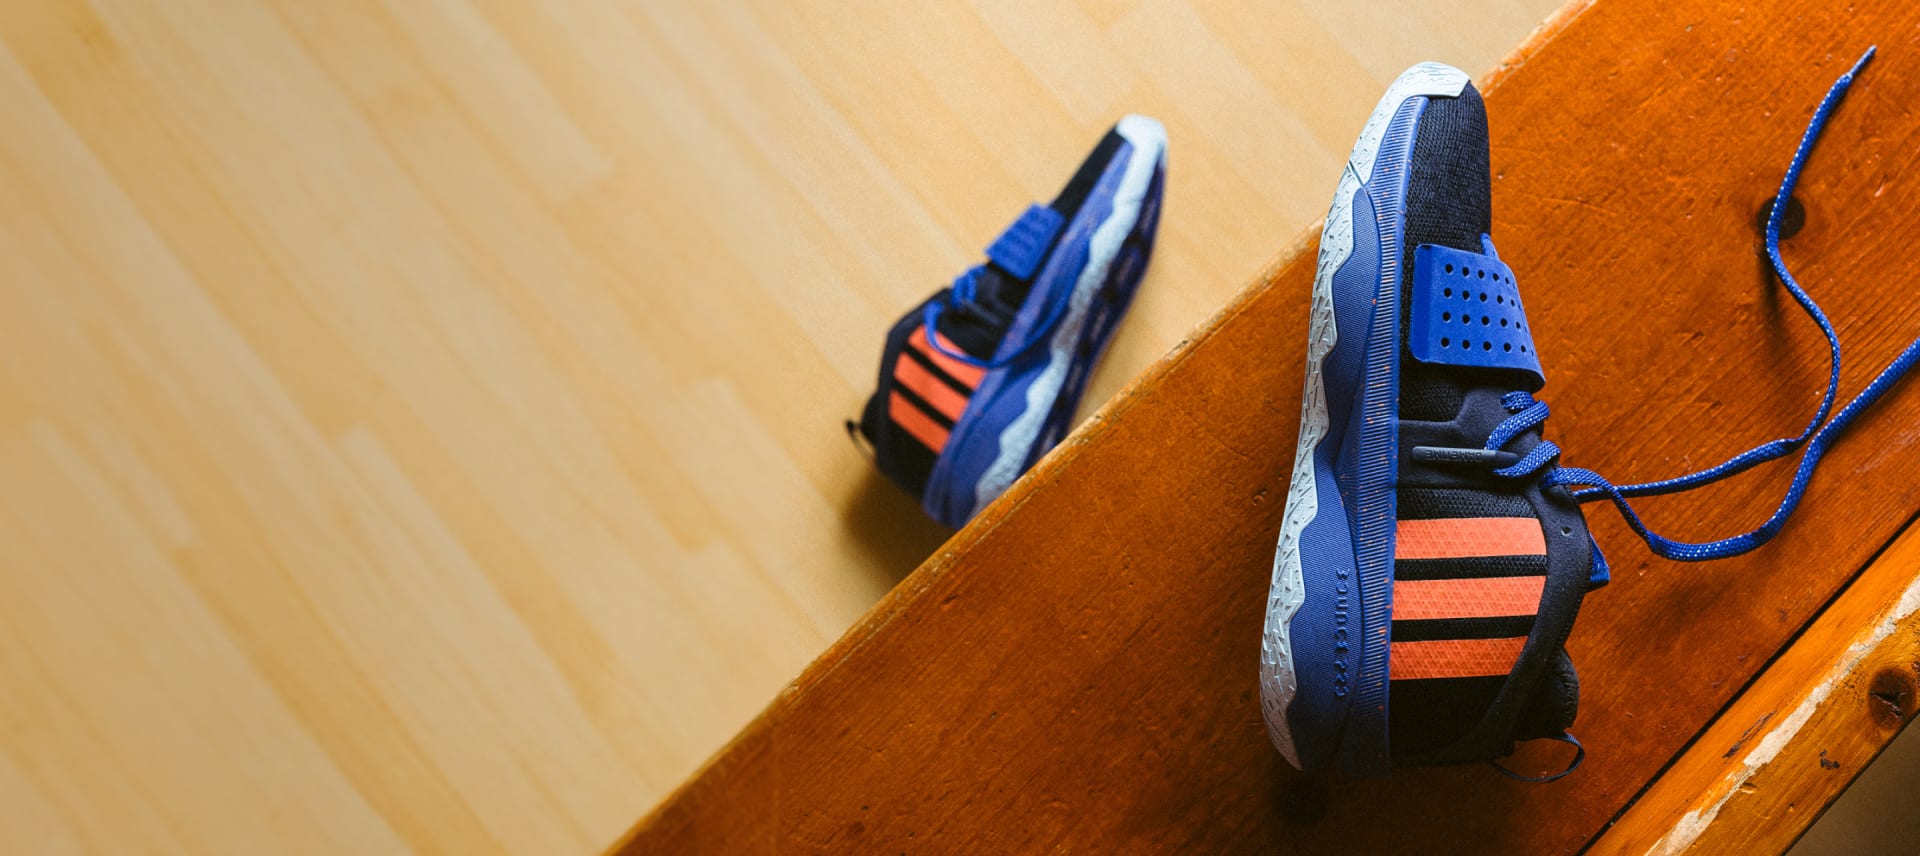 Two blue and orange basketball shoes lie on their side on sports court